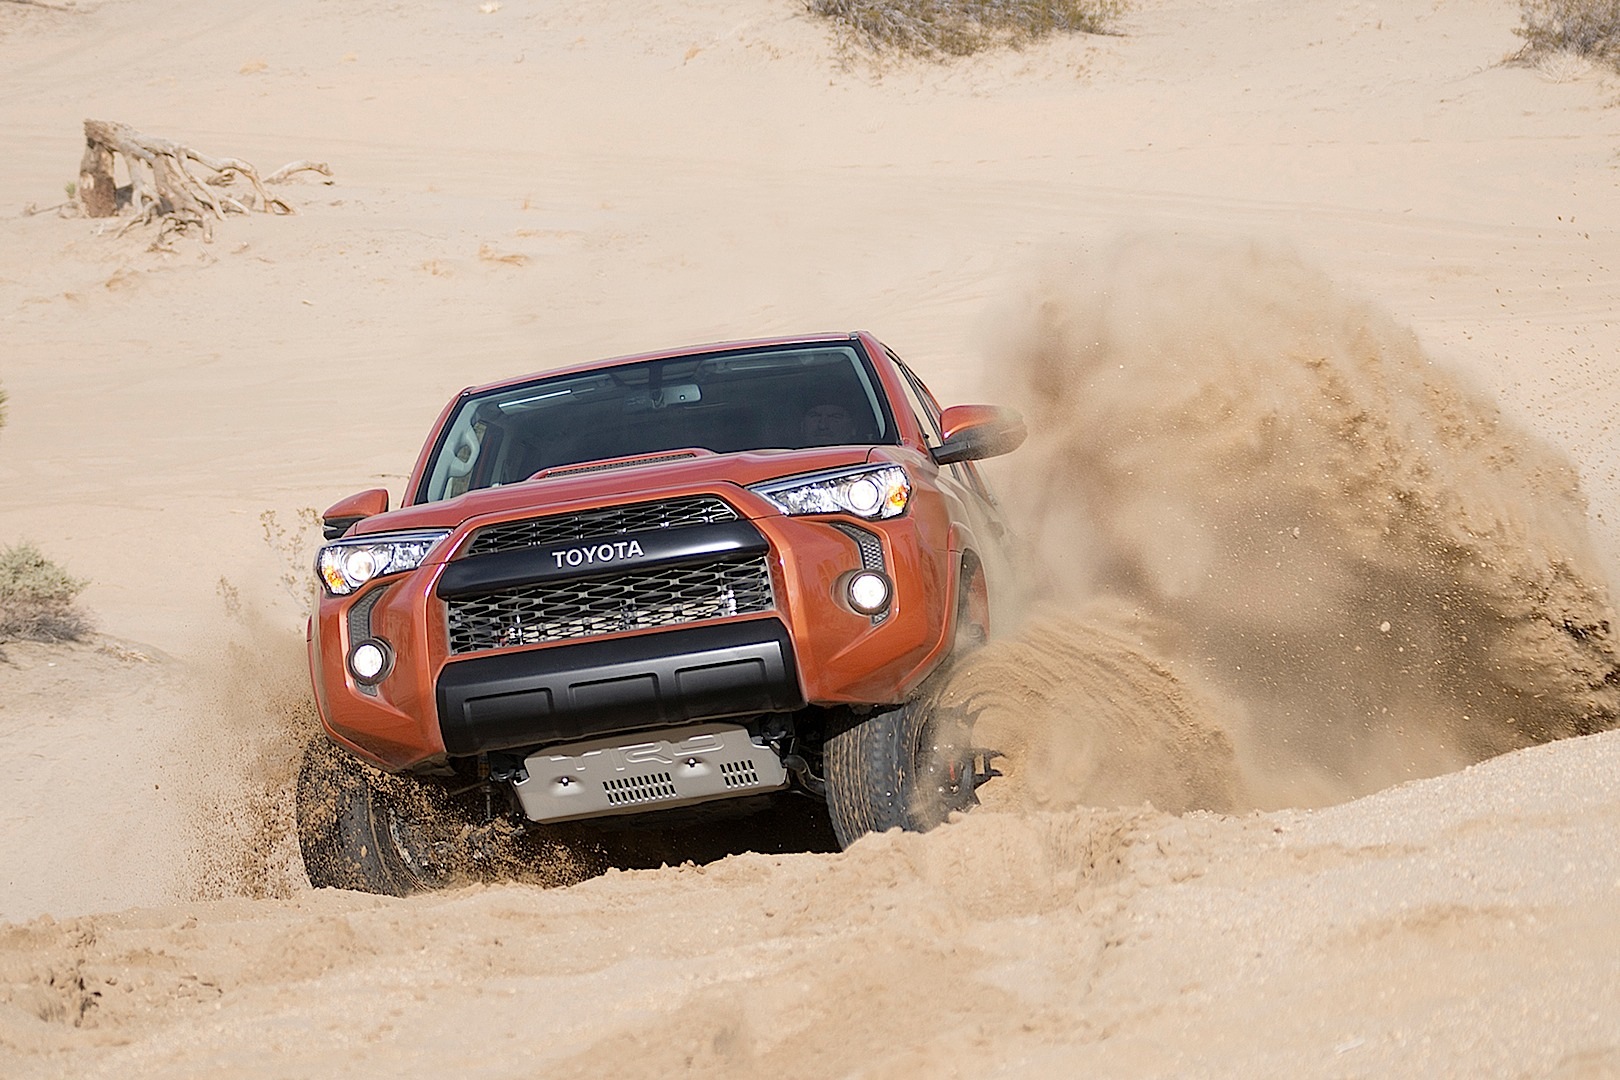 Get Your Toyota Trd Pro HD Wallpaper Here Photo Gallery